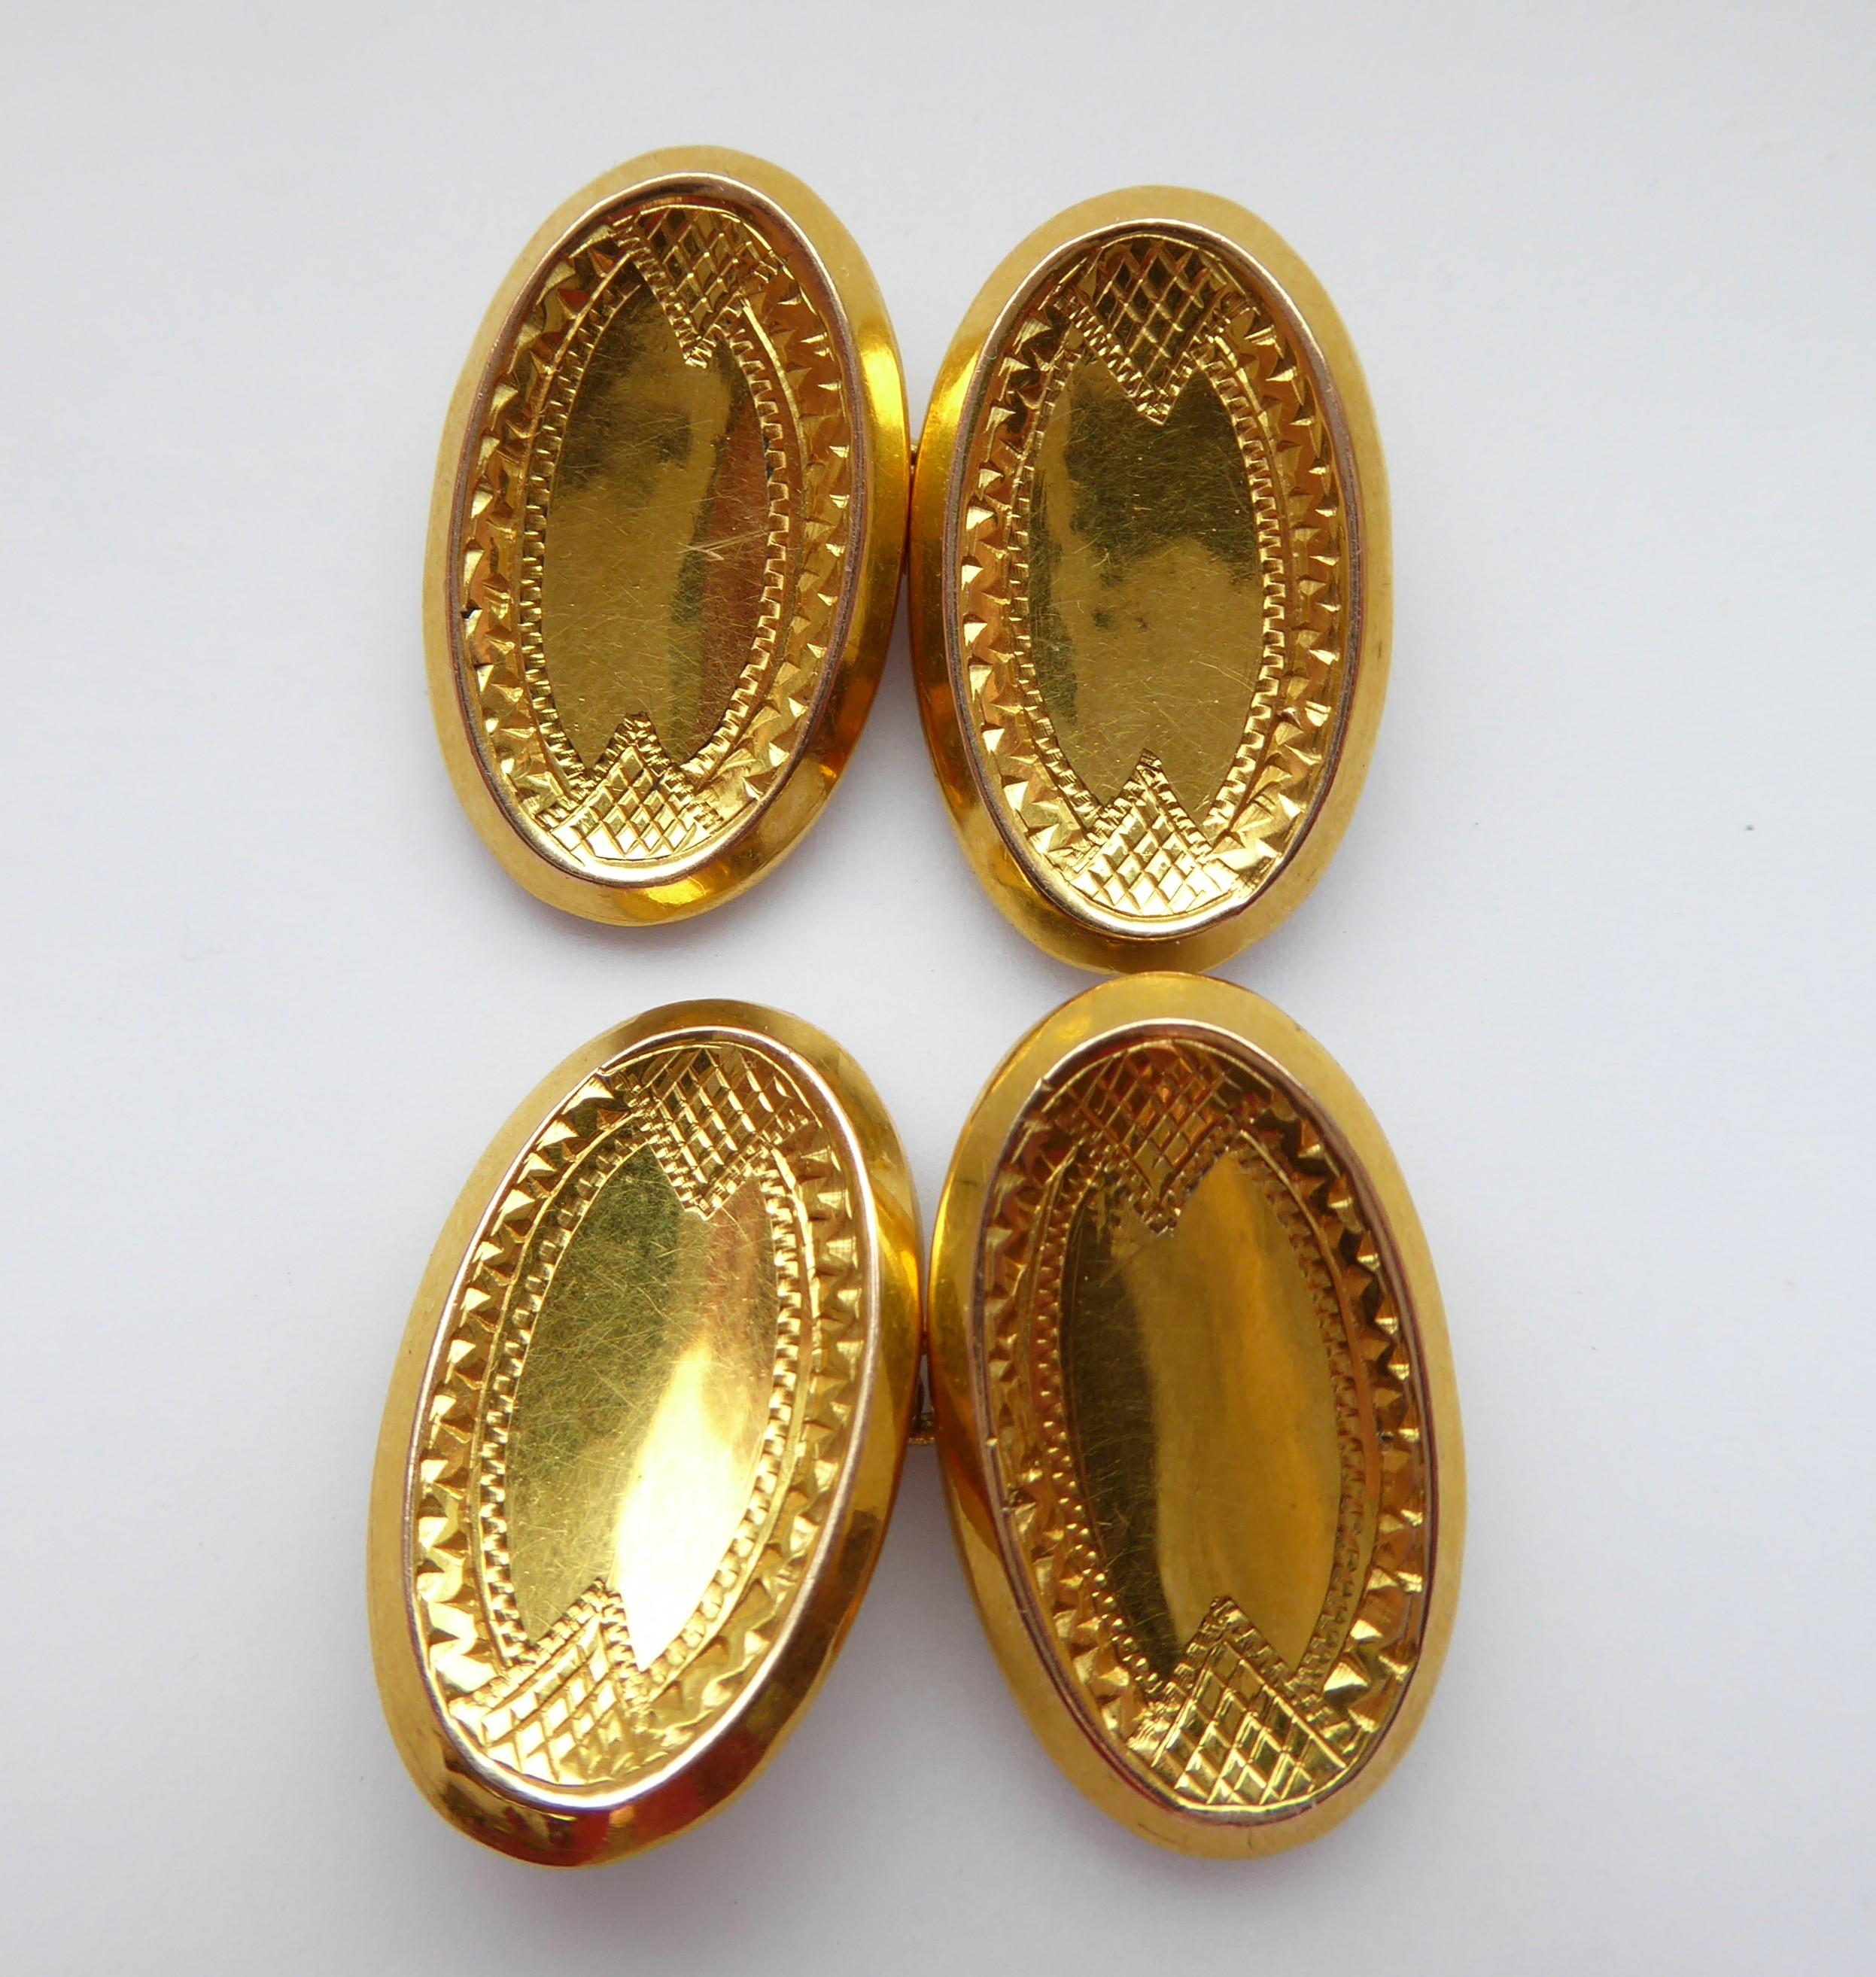 A pair of antique gold cufflinks dating from 1911 and hallmarked at Chester Assay Office in England.  The cufflinks are oval shaped with a chamfered edge to a slightly dished panel.  The edge of the panel are decorated with a doule row of 